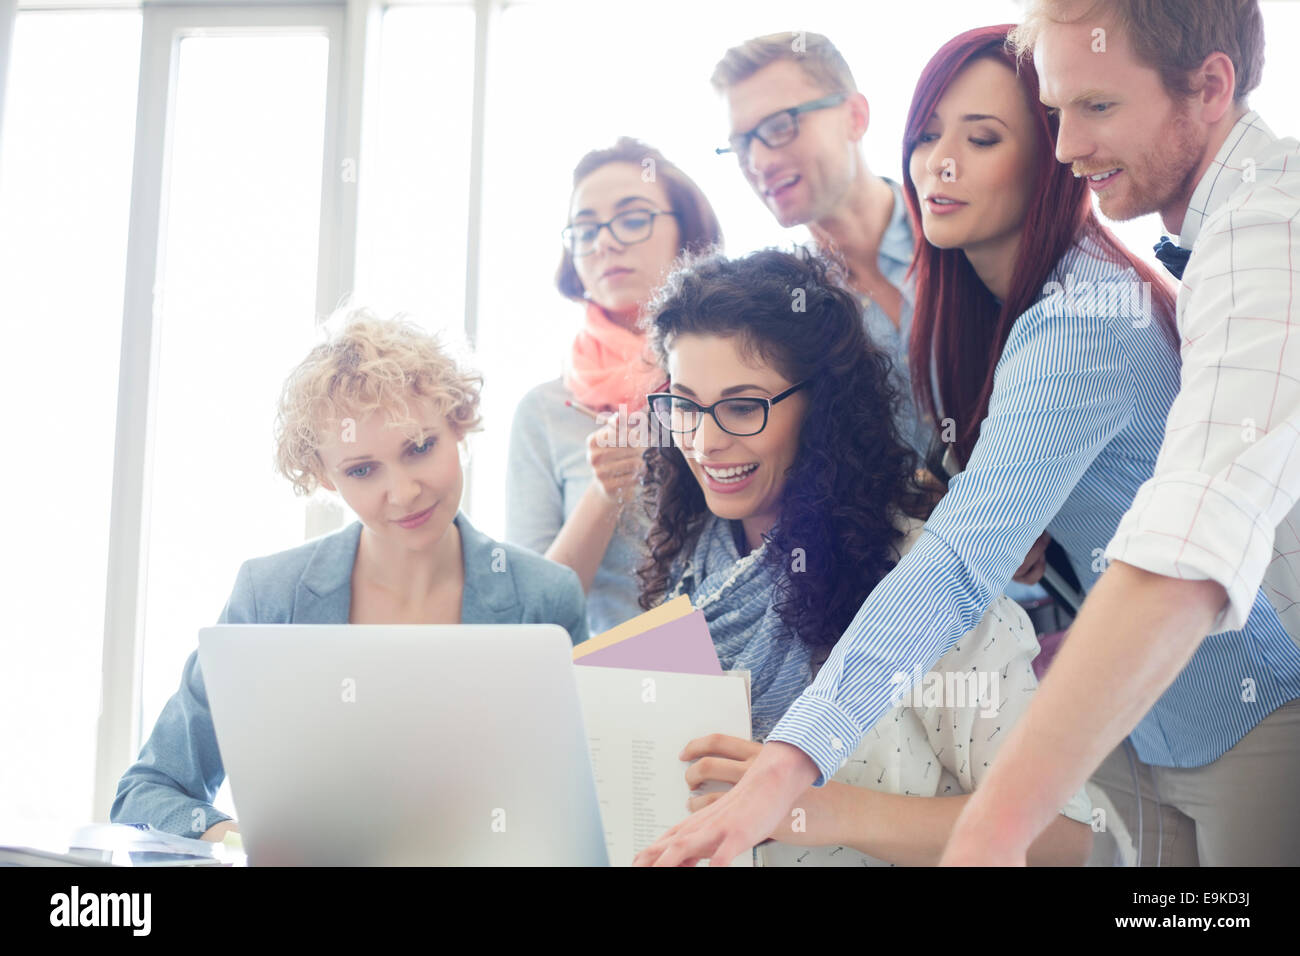 Group of creative businesspeople using laptop in office Stock Photo